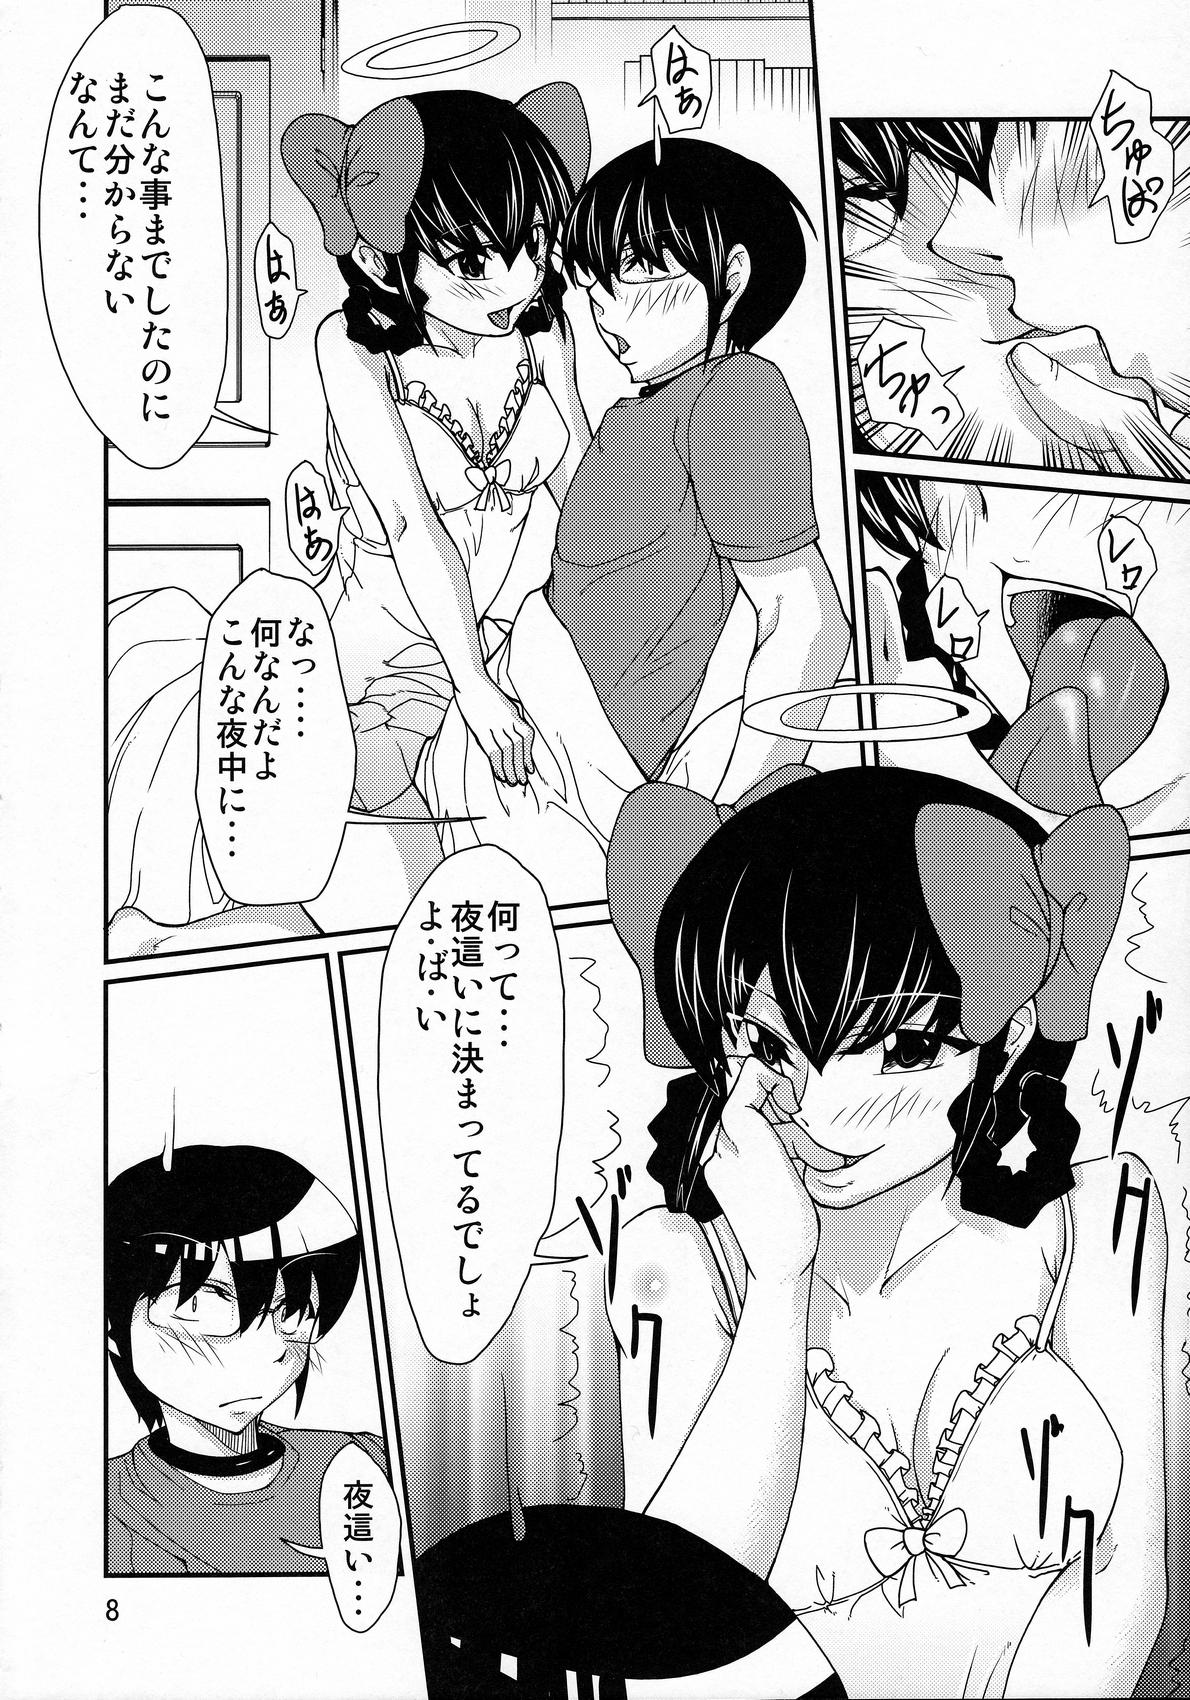 Mature Megami no Saihai - The world god only knows Amature - Page 7